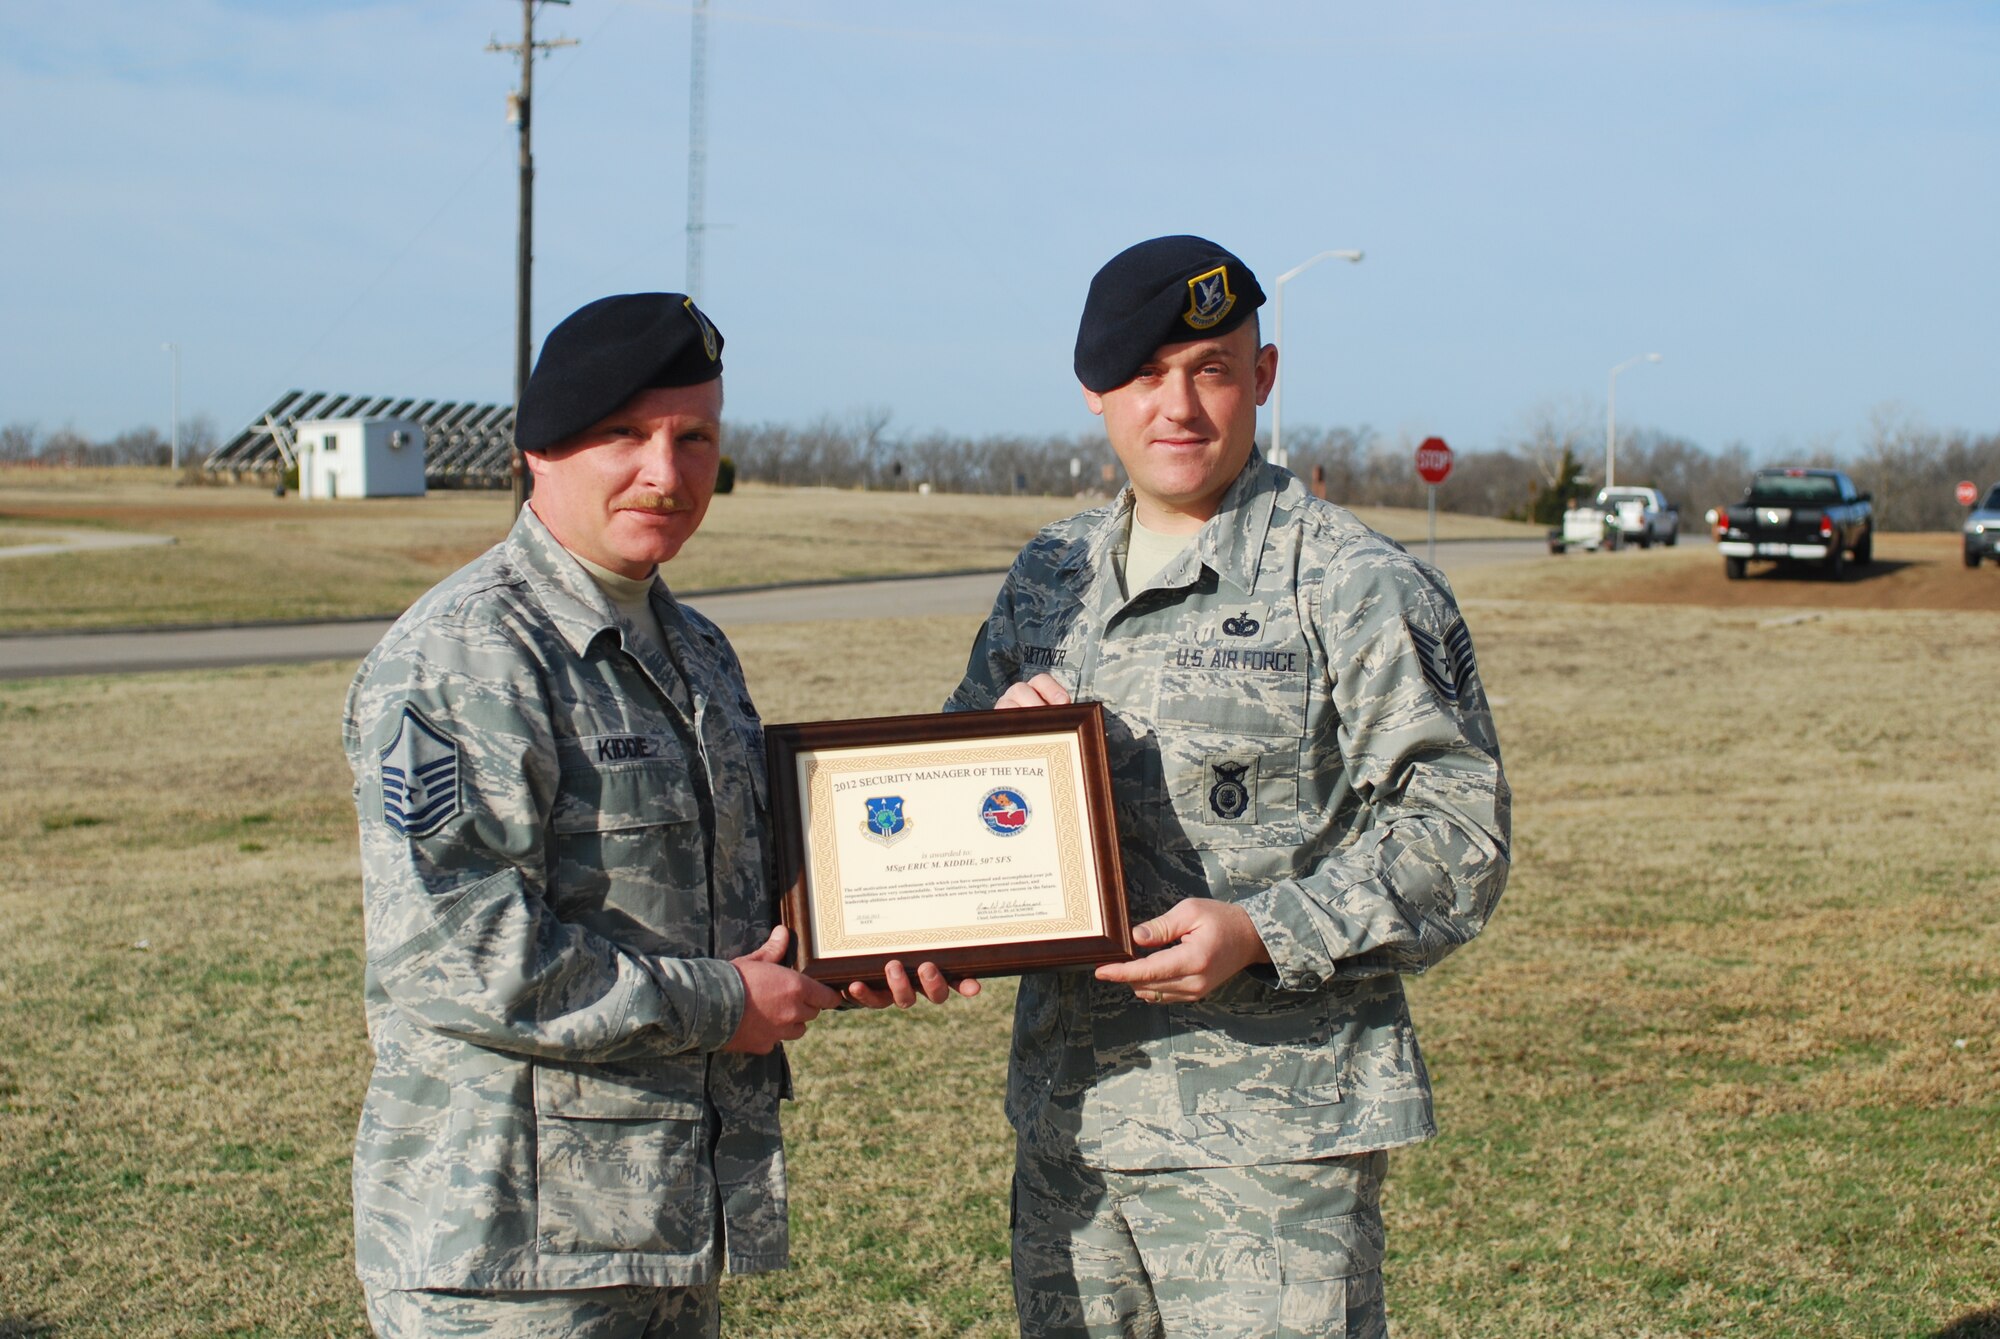 Master Sgt. Eric Kiddie, left, and Tech. Sgt. Ricky Buettner from the 507th Security Forces Squadron received the 72nd Air Base Wing 2012 Security Manager of the Year award on Feb. 20, 2013.  Kiddie and Buettner received zero write-ups during the yearly inspection, a feat accomplished by very few security managers each year.  They are the first security managers from the 507th Air Refueling Wing in over 10 years to win the award.  (U.S. Air Force Photo by Senior Airman Mark Hybers)